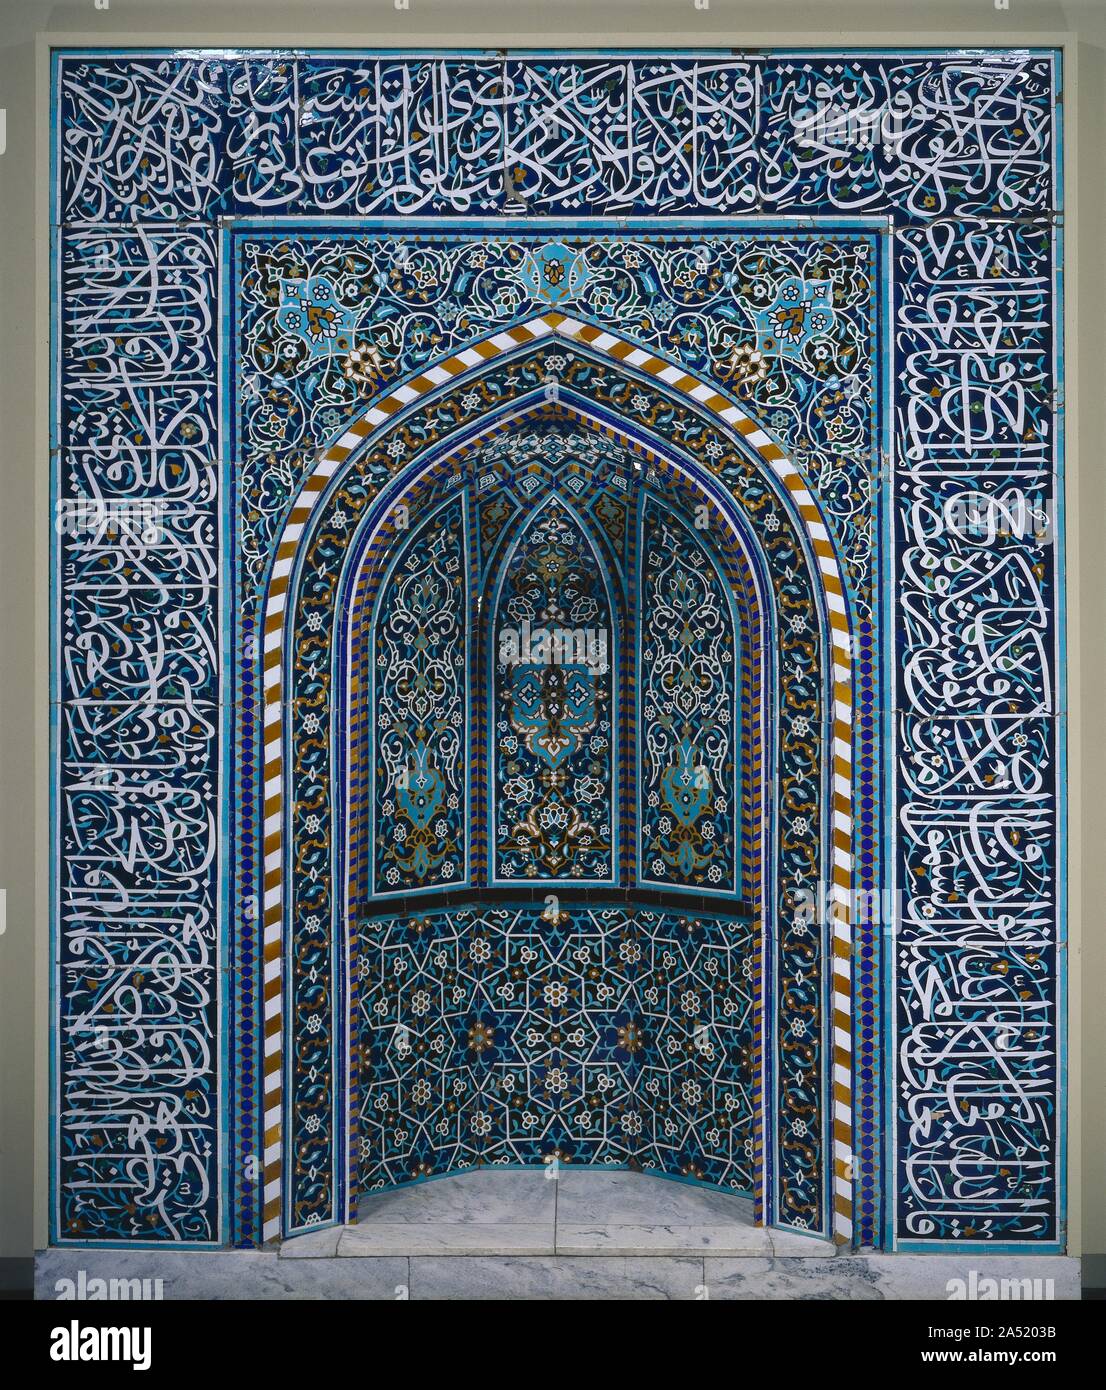 Prayer Niche (Mihrab), early 1600s. The prayer niche (mihrab in Arabic) is the focal point in the interior of a mosque. It is located in the qibla wall which is oriented toward Mecca, the holy city of Islam. Muslims face the qibla wall during prayer. This mihrab is an excellent example of different design elements-calligraphy, plants, and geometry-integrated into a beautiful harmonious whole. Graduated colours and sizes contribute to its success. The dominant white glaze presents the most important verses from the Qur&#x2019;an written in elegant thuluth script which frames the niche. White gl Stock Photo